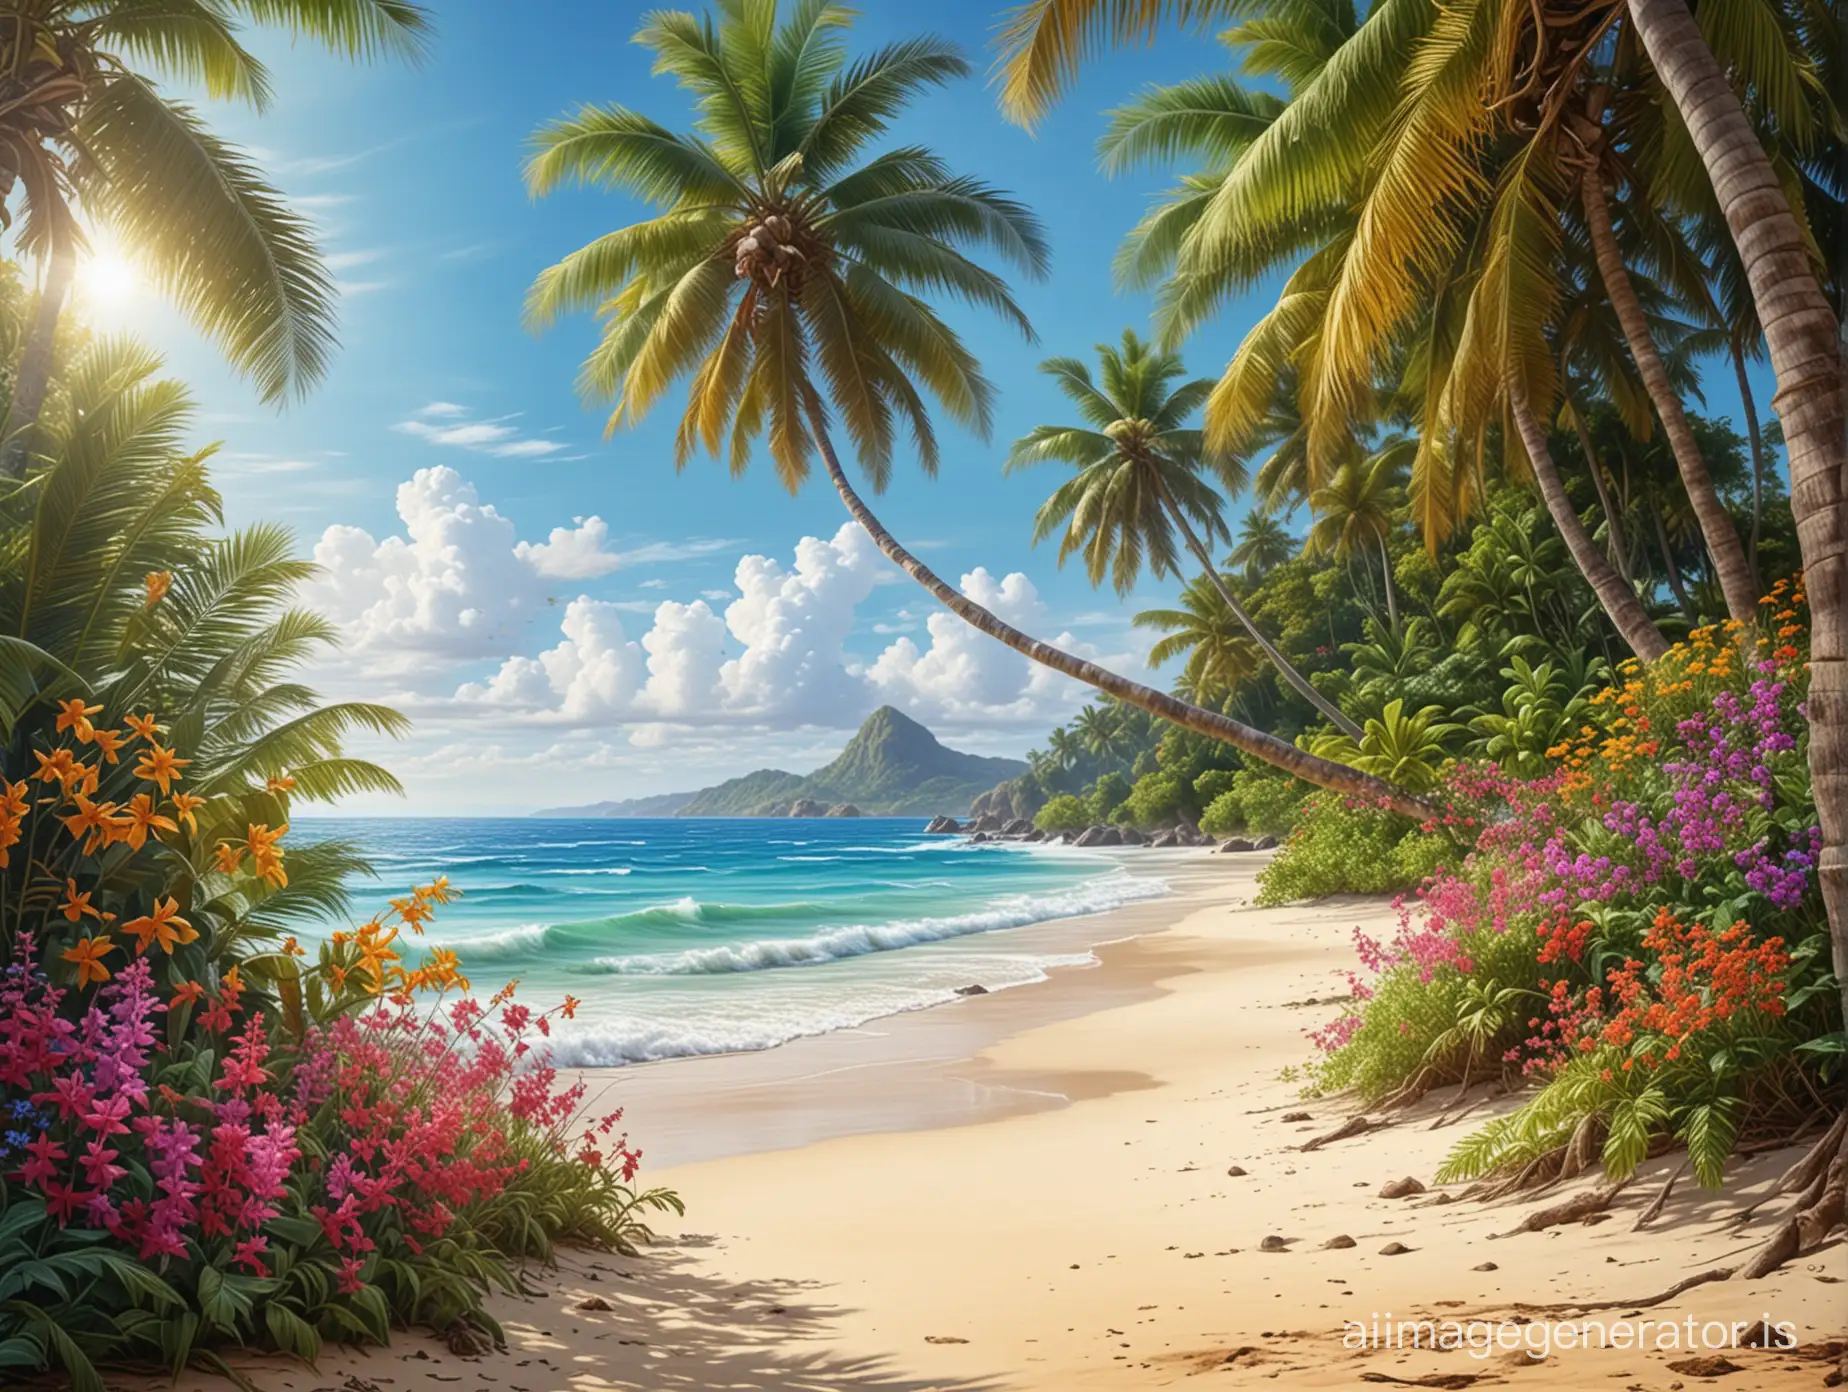 Vibrant-Tropical-Beach-Landscape-with-Wildflowers-and-Coconut-Tree-under-Sunny-Sky